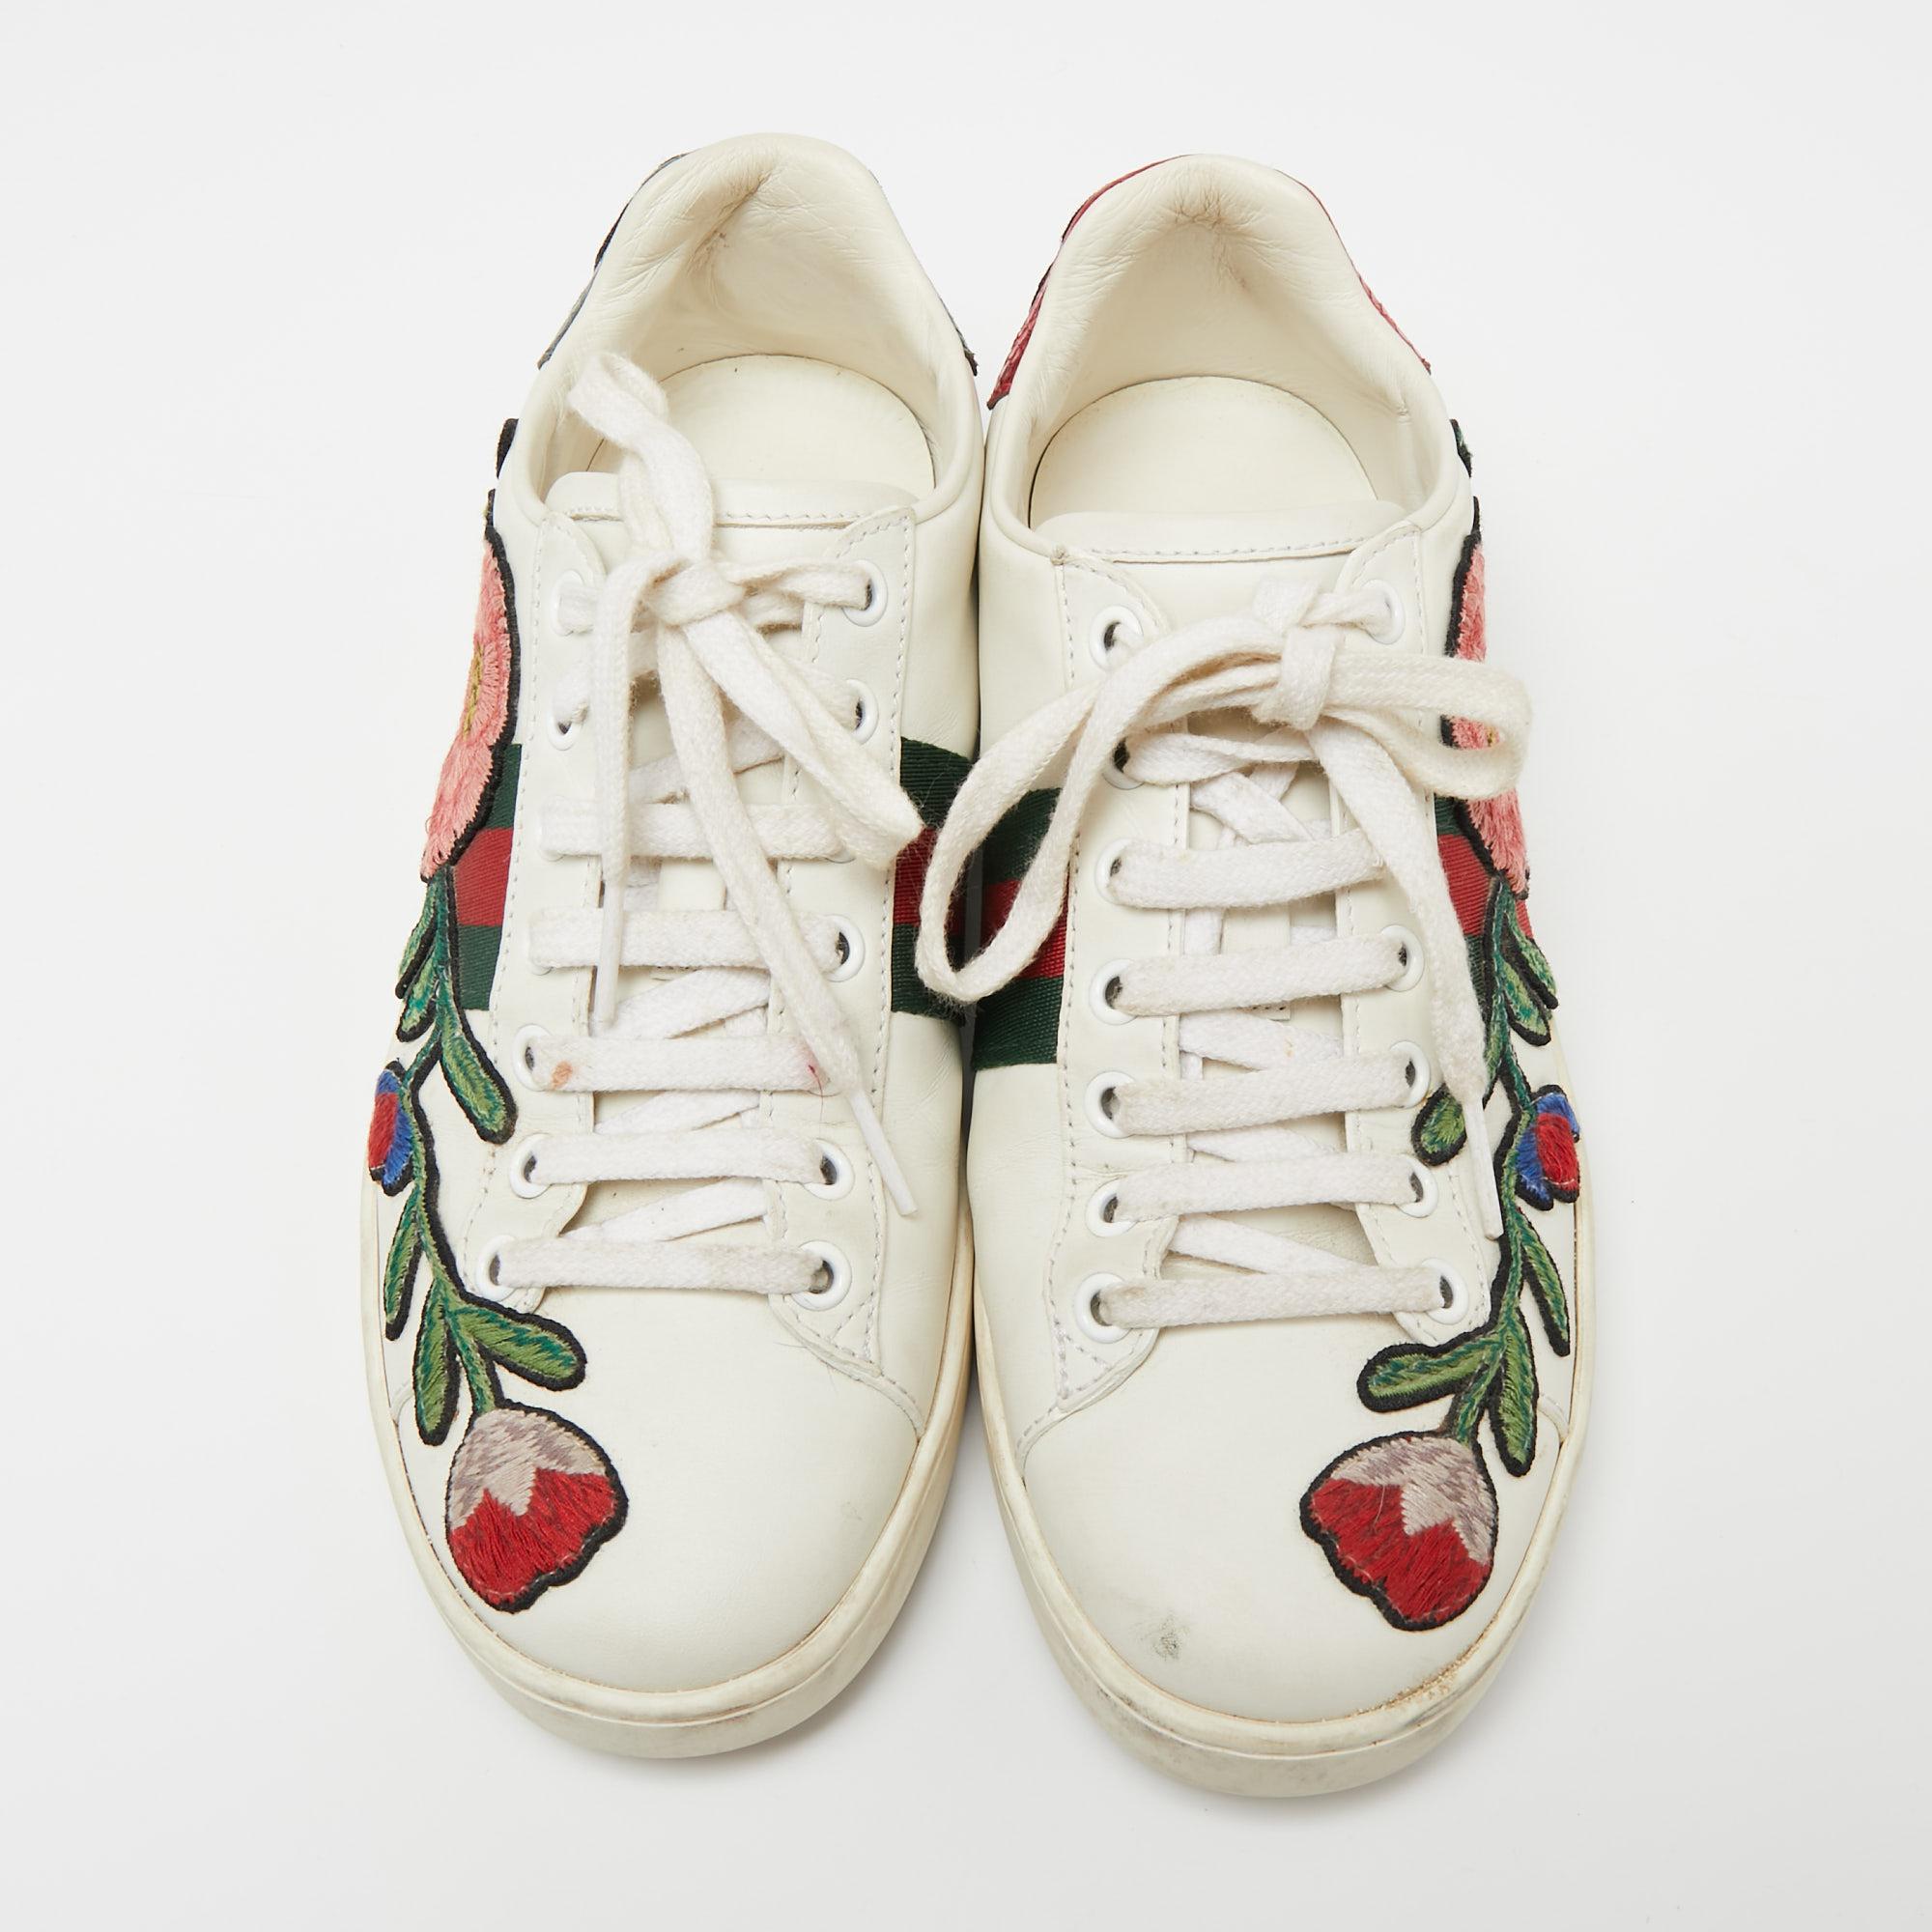 How one's heart flutters at the sight of these Gucci sneakers! Beautifully crafted from leather, they carry the signature web stripe and floral embroidery on the sides. Sneakers are definitely the rage at the moment but these Gucci ones are just a